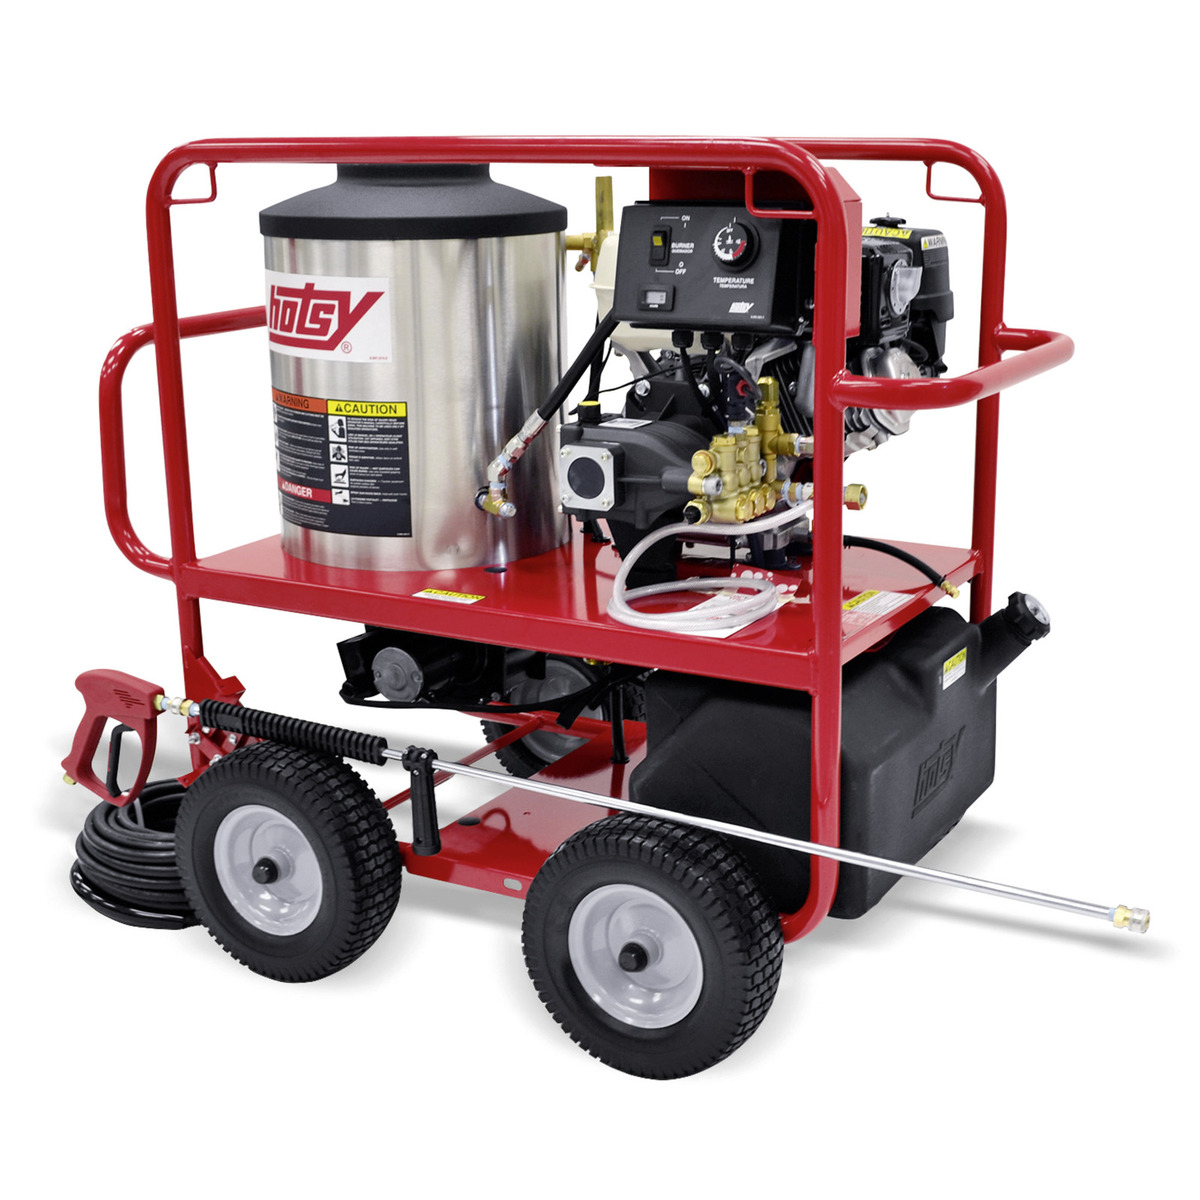 Hotsy Gas Engine Roll Cage Series – Portable Gas/Diesel Hot Water Pressure Washers